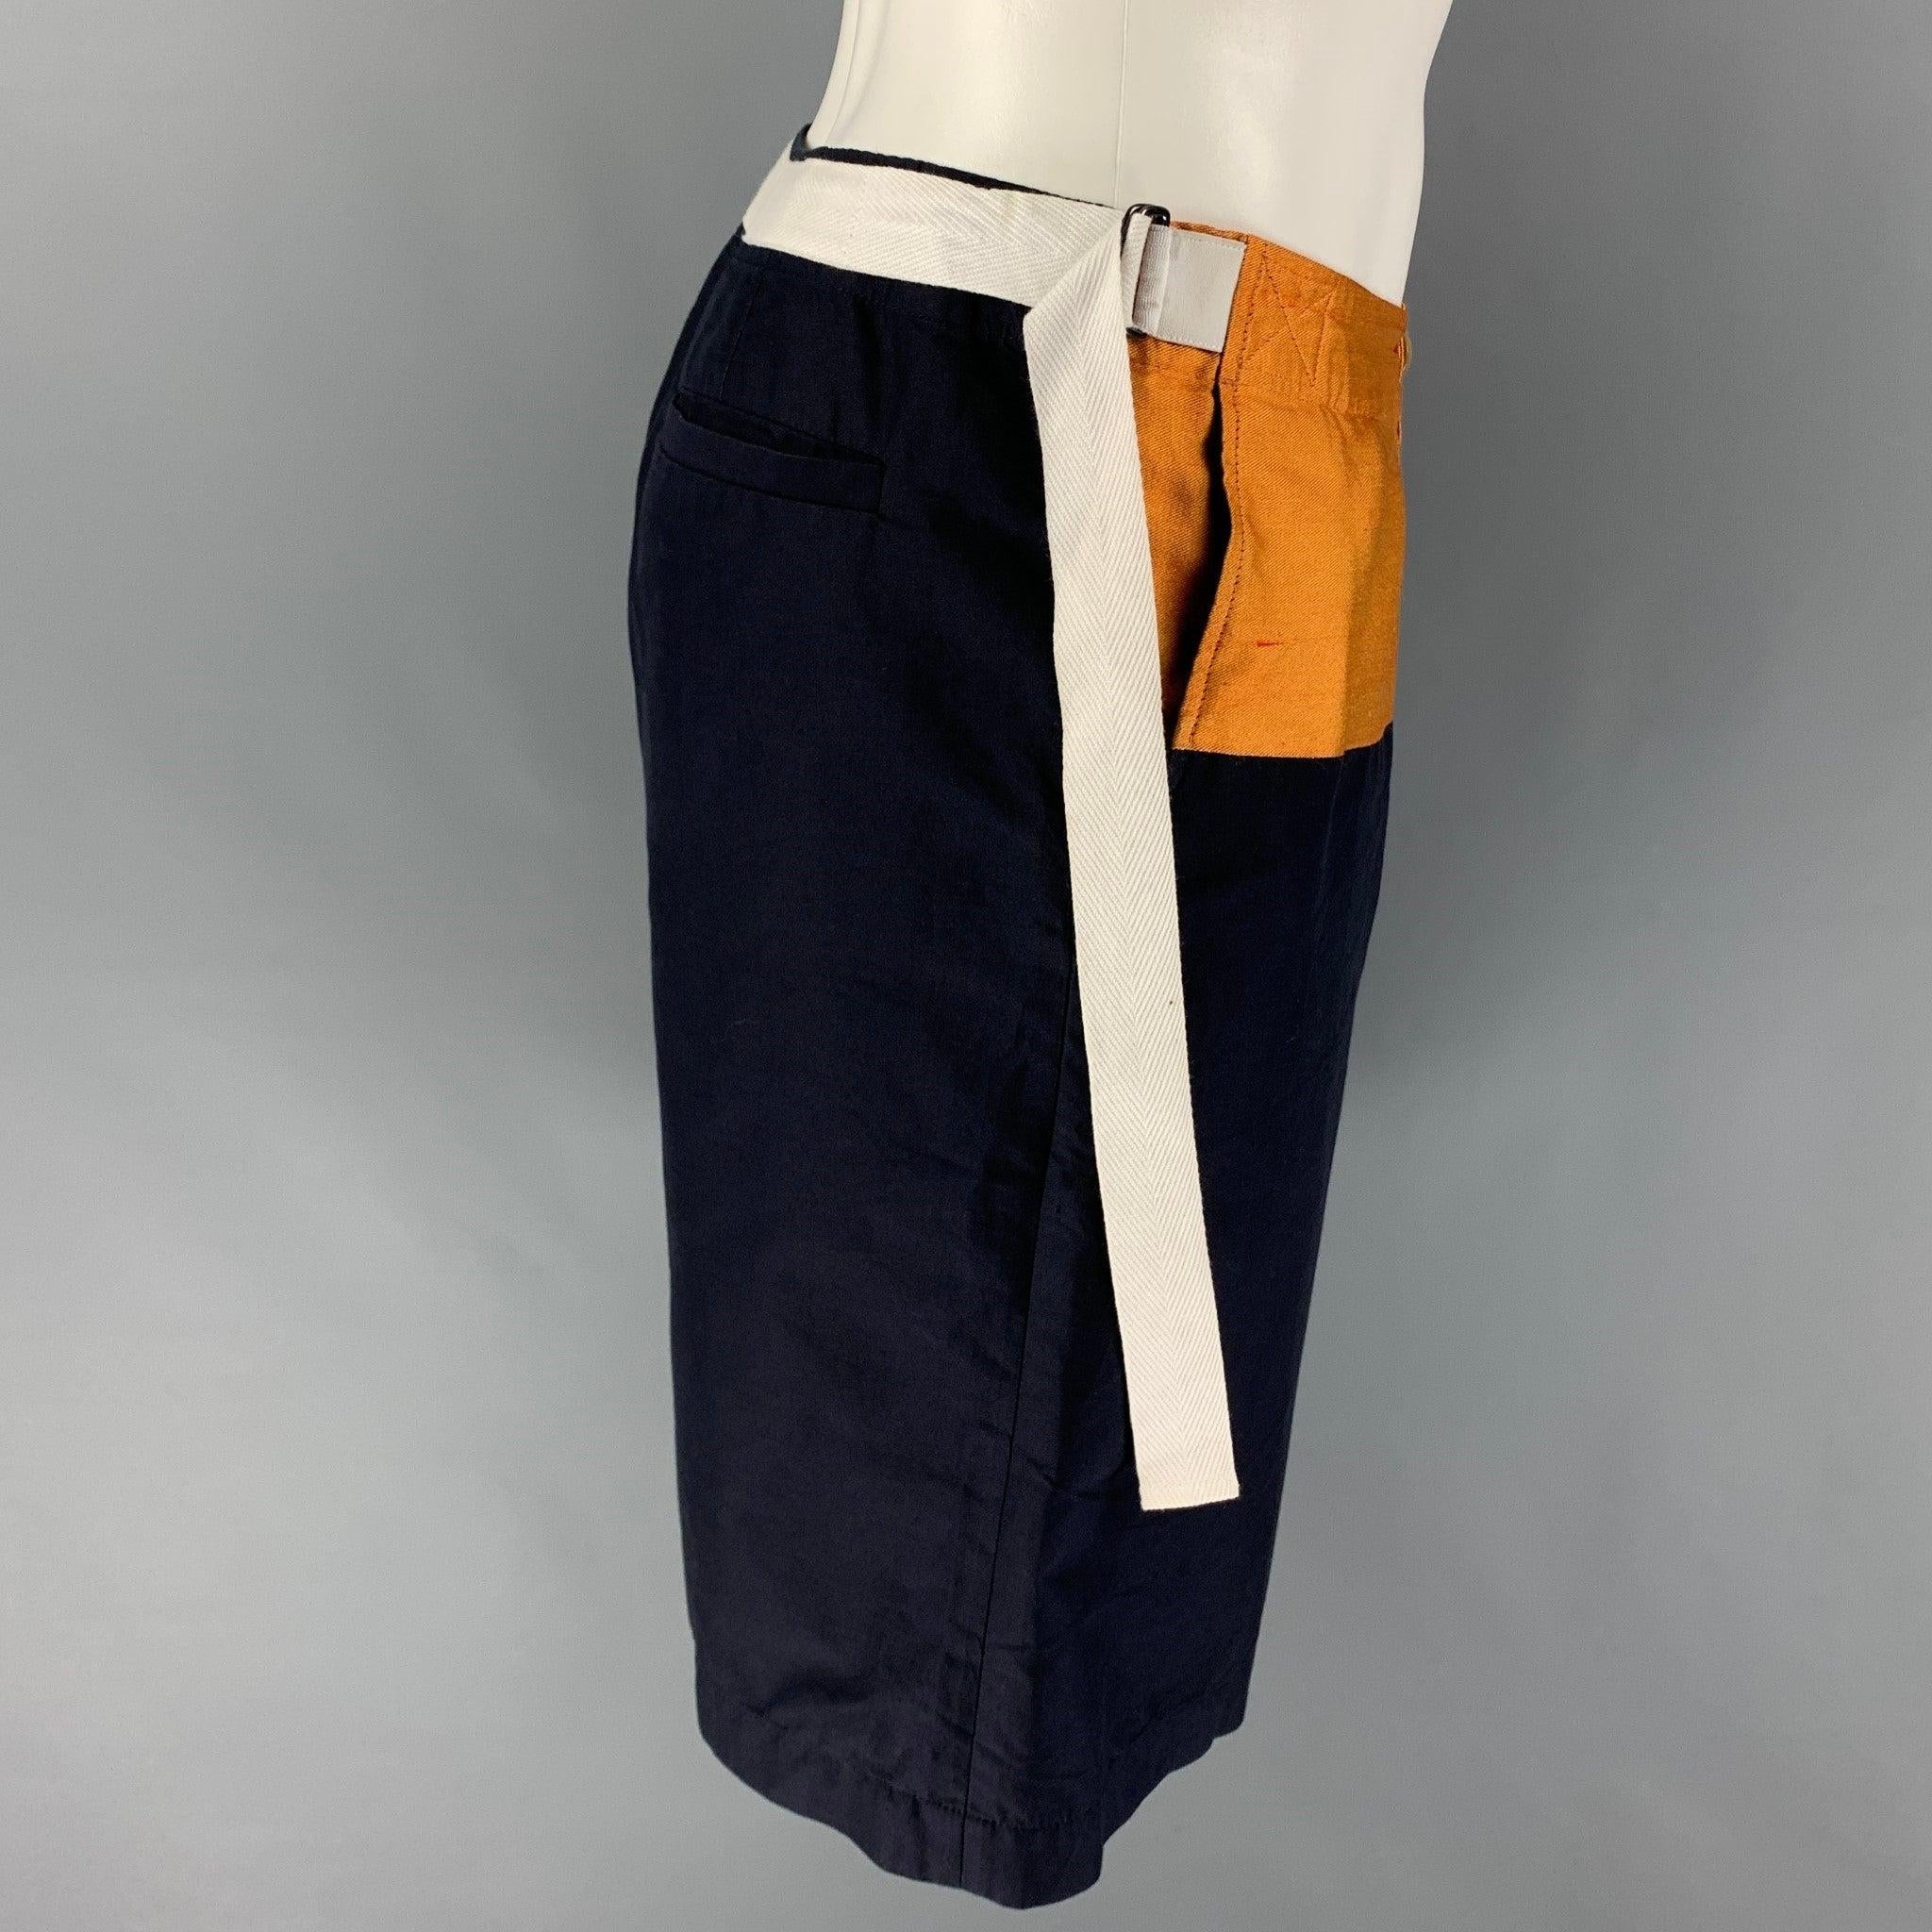 DRIES VAN NOTEN shorts comes in a navy & gold color block featuring adjustable side straps, zip fly, and a buttoned closure. Made in Romania. Excellent
Pre-Owned Condition. 

Marked:   48 

Measurements: 
  Waist: 32 inches  Rise: 11 inches  Inseam: